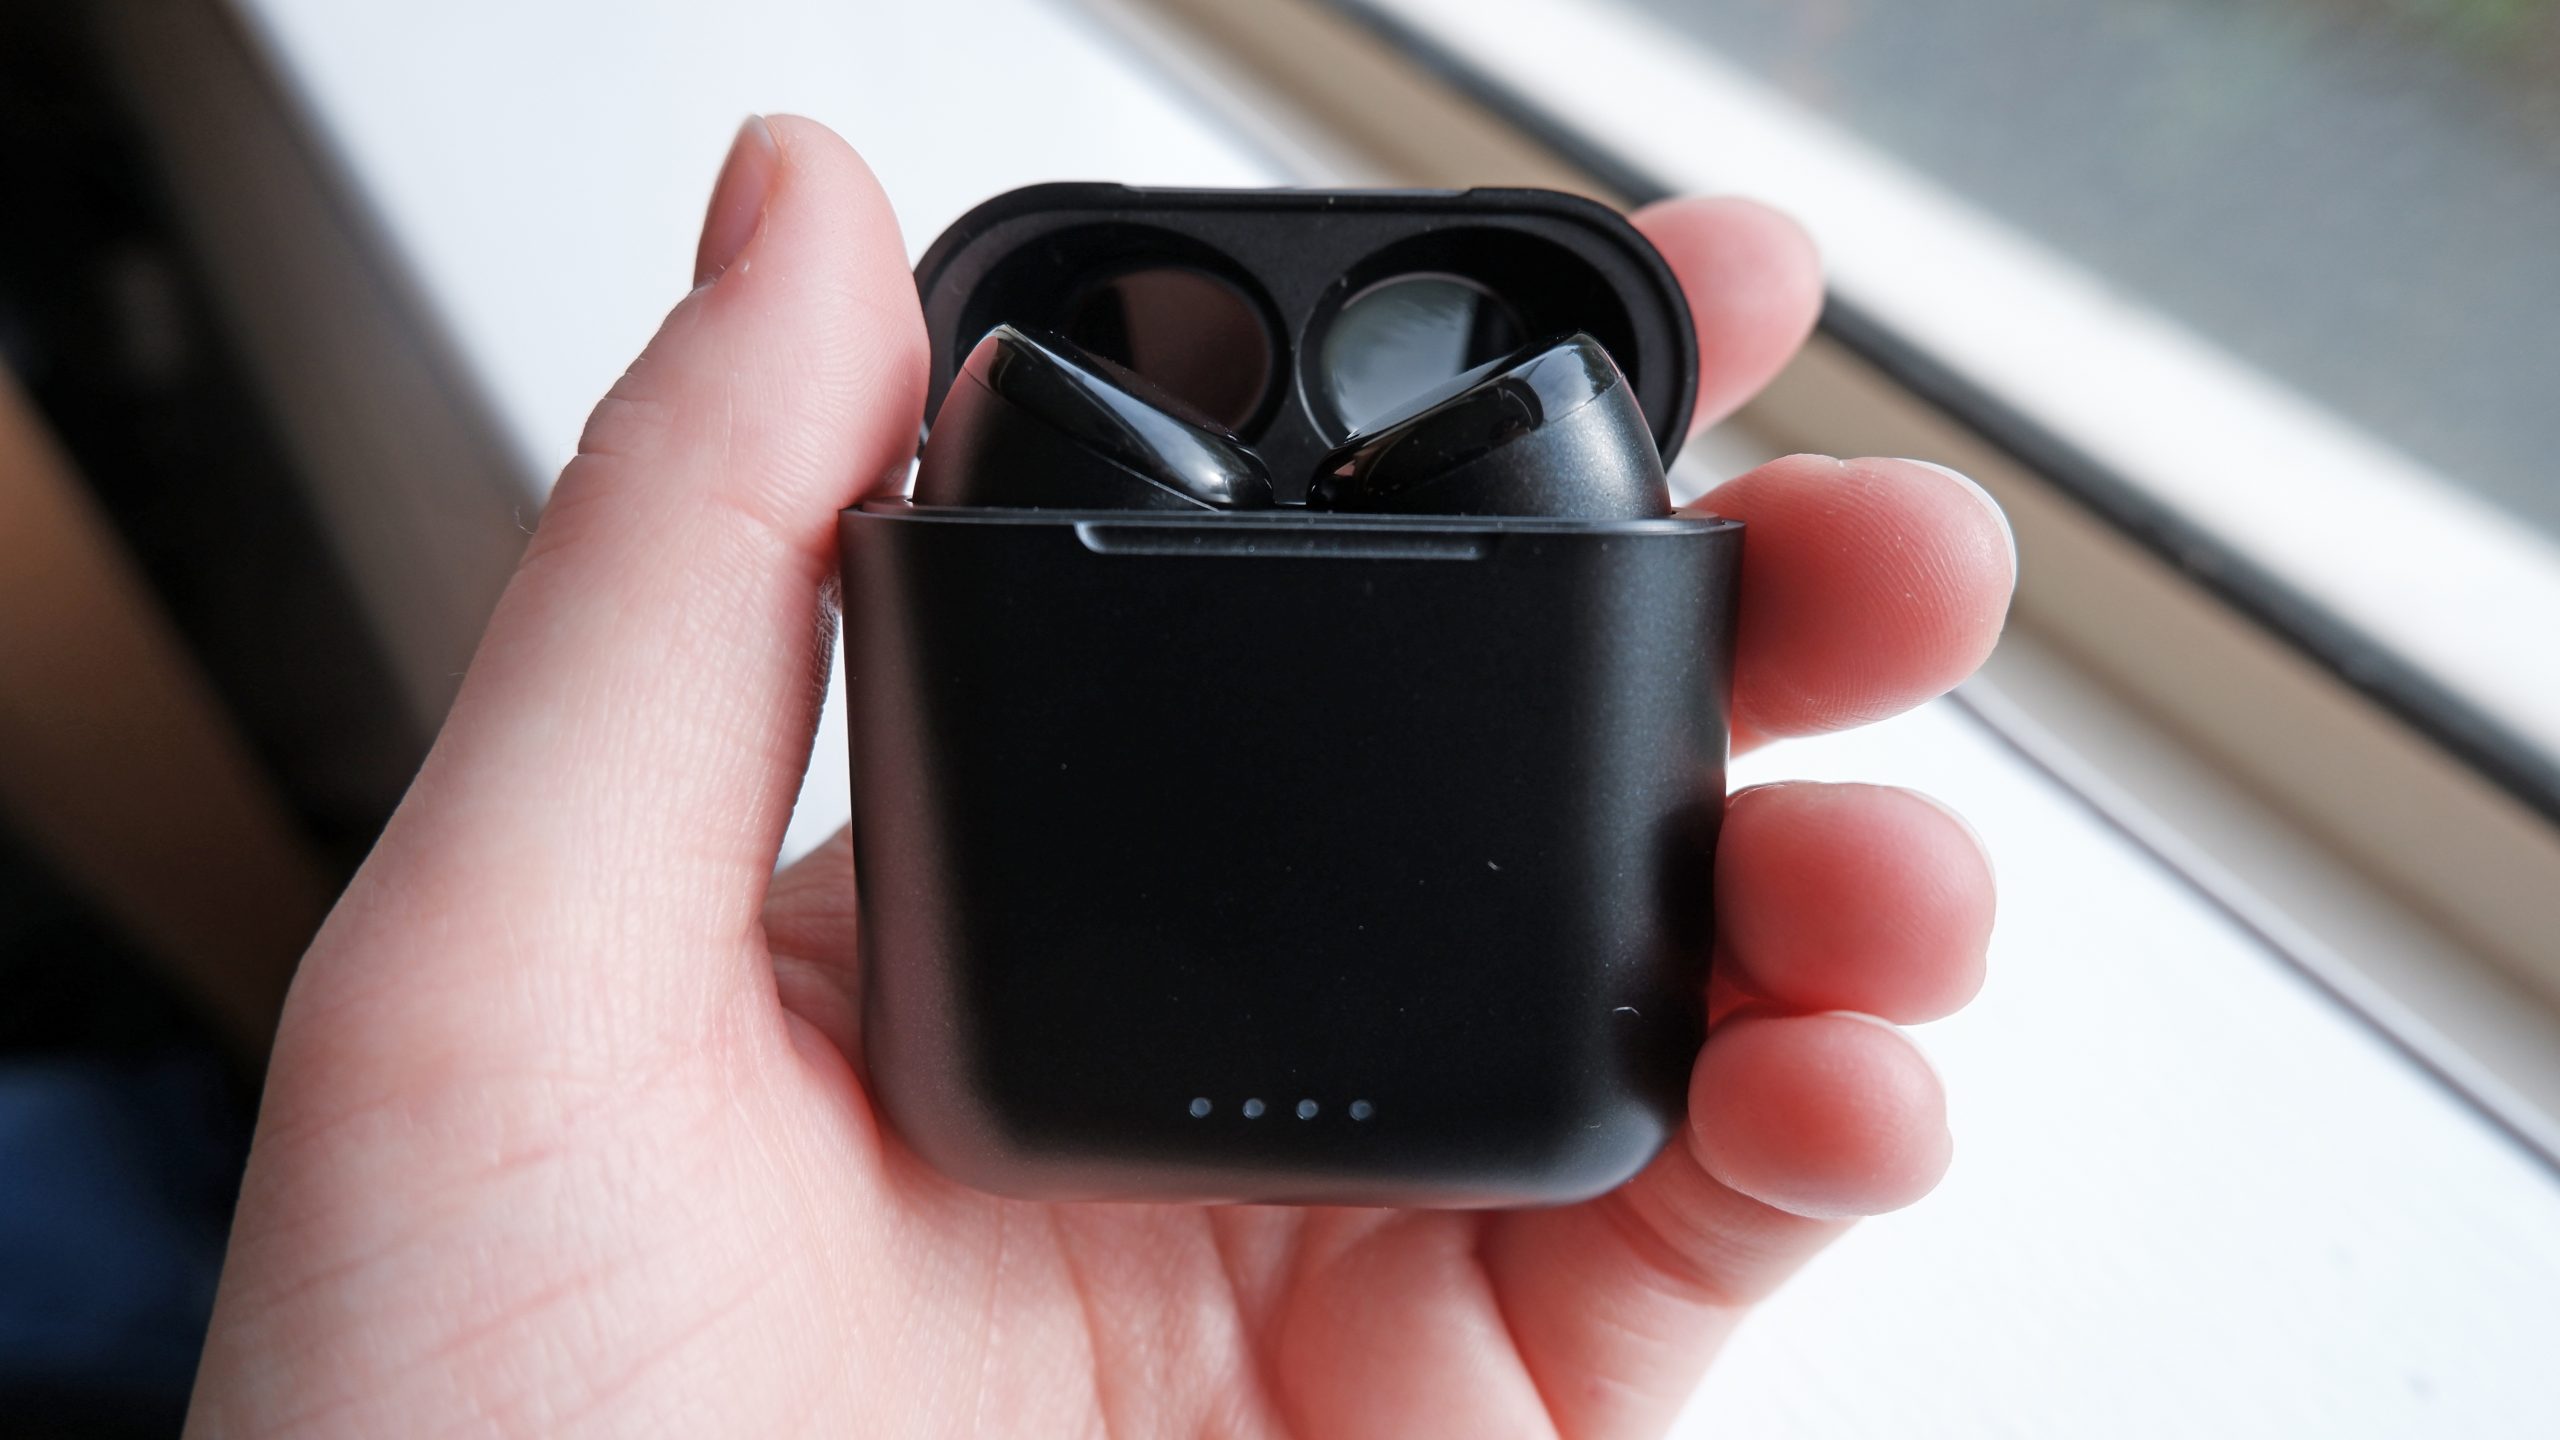 The TOZO T6 case open with the earbuds inside, the case being held by a hand.